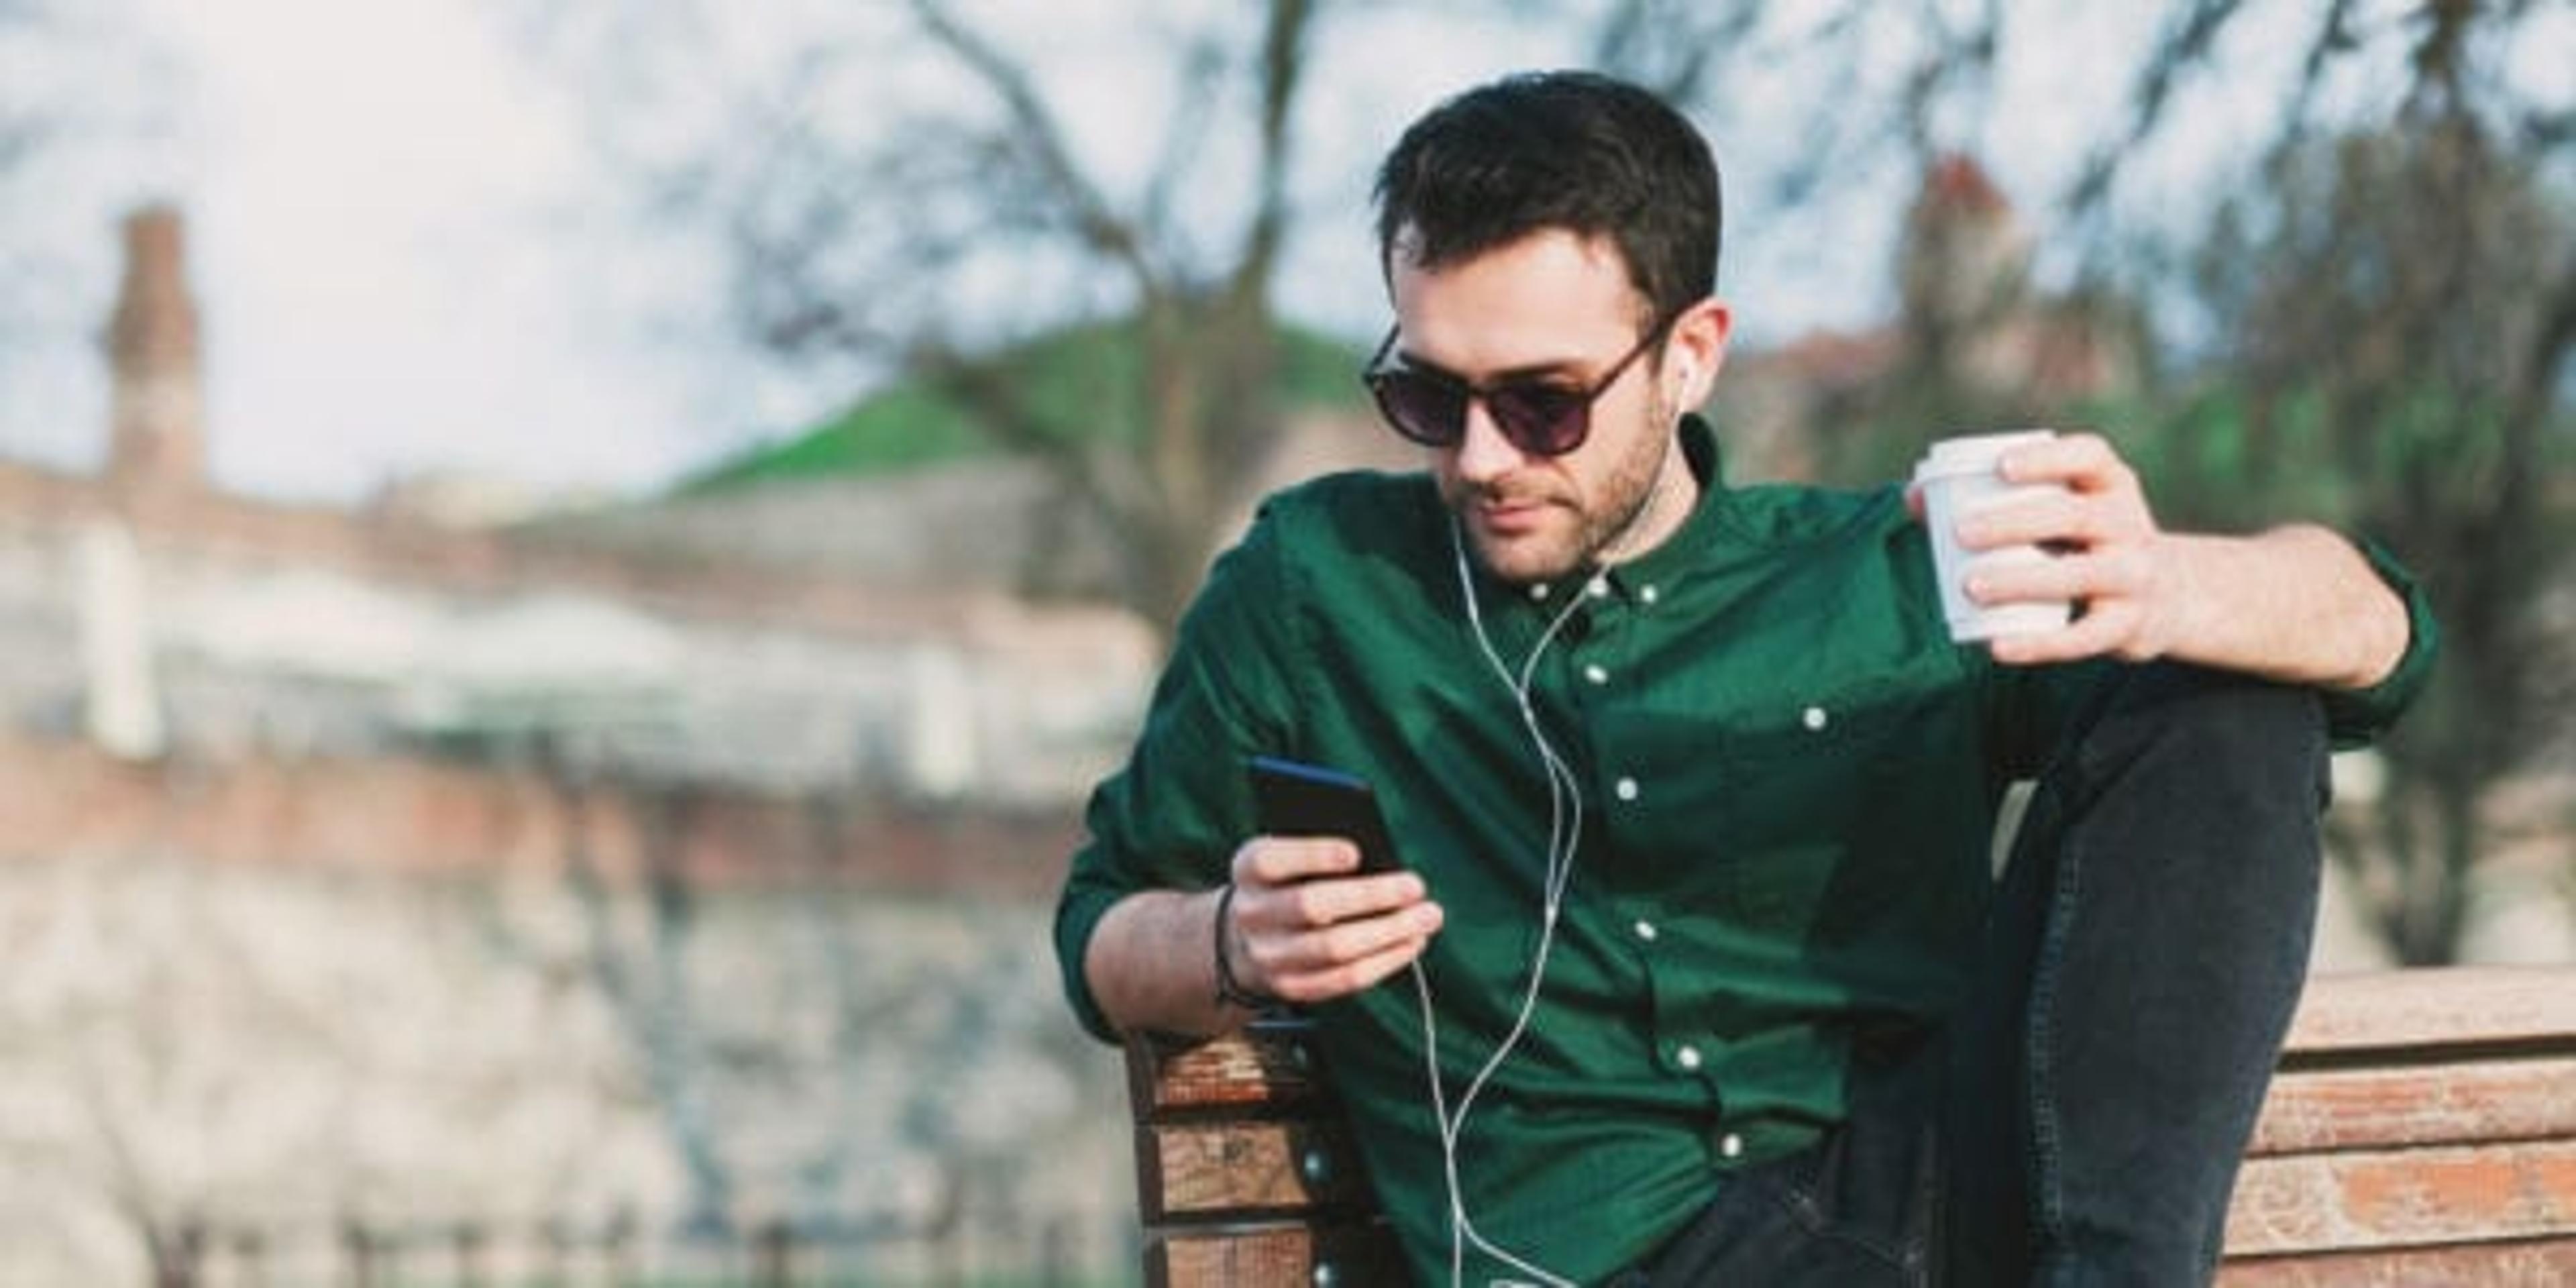 Young man drinking coffee listening to music on his smartphone through earbuds.